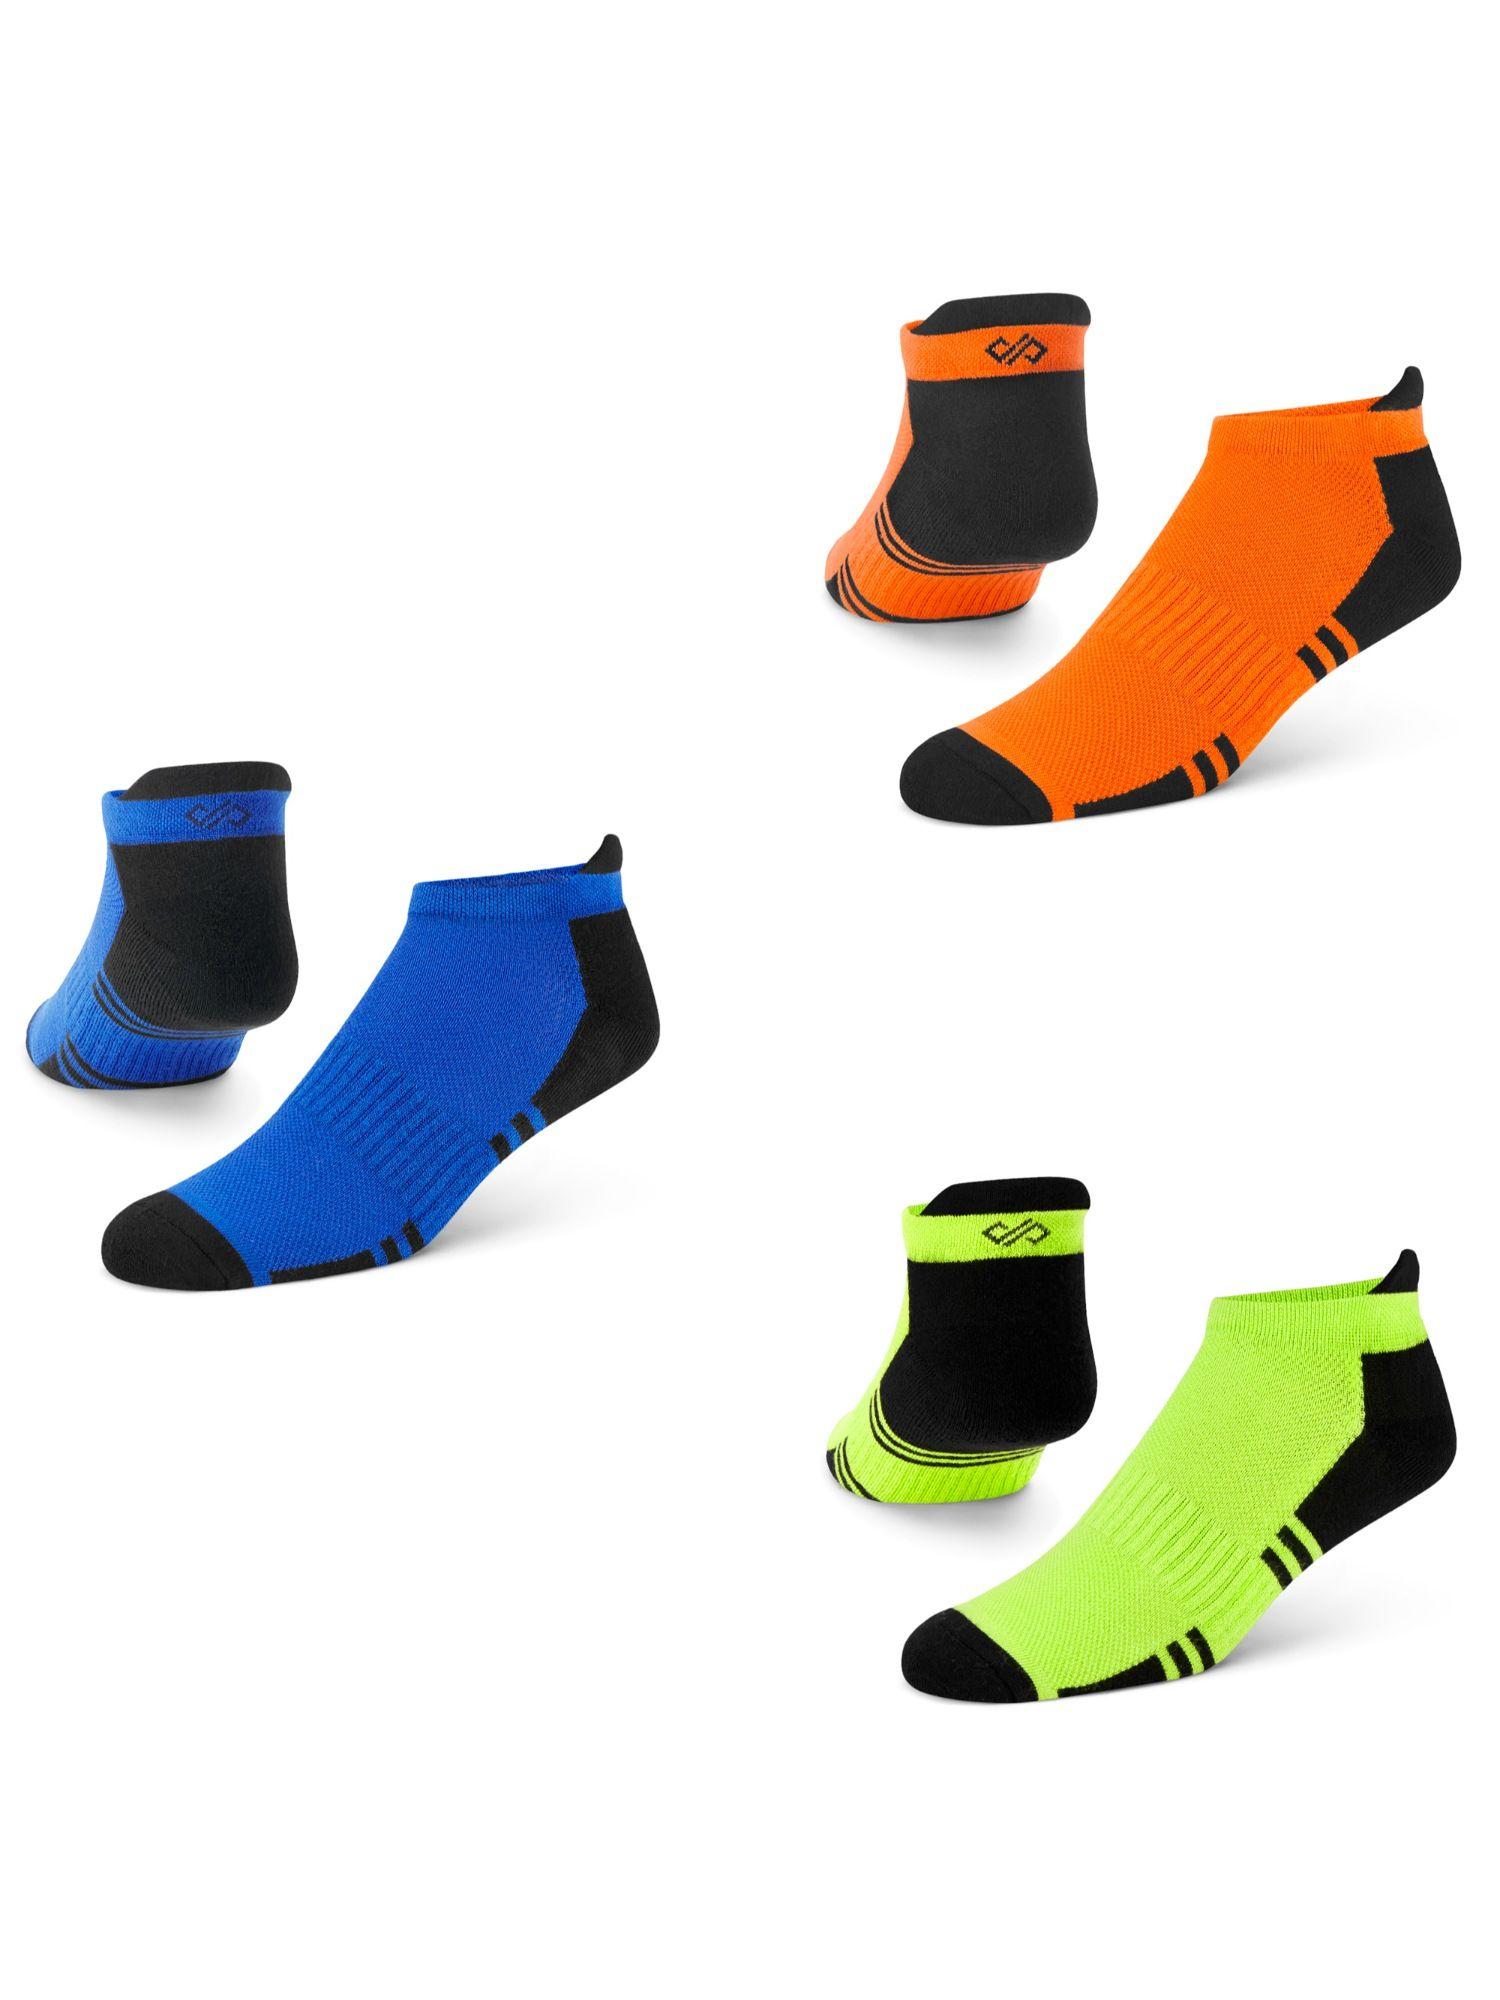 dual solid multicolor men bamboo ankle length socks - free size - pack of 3 pairs